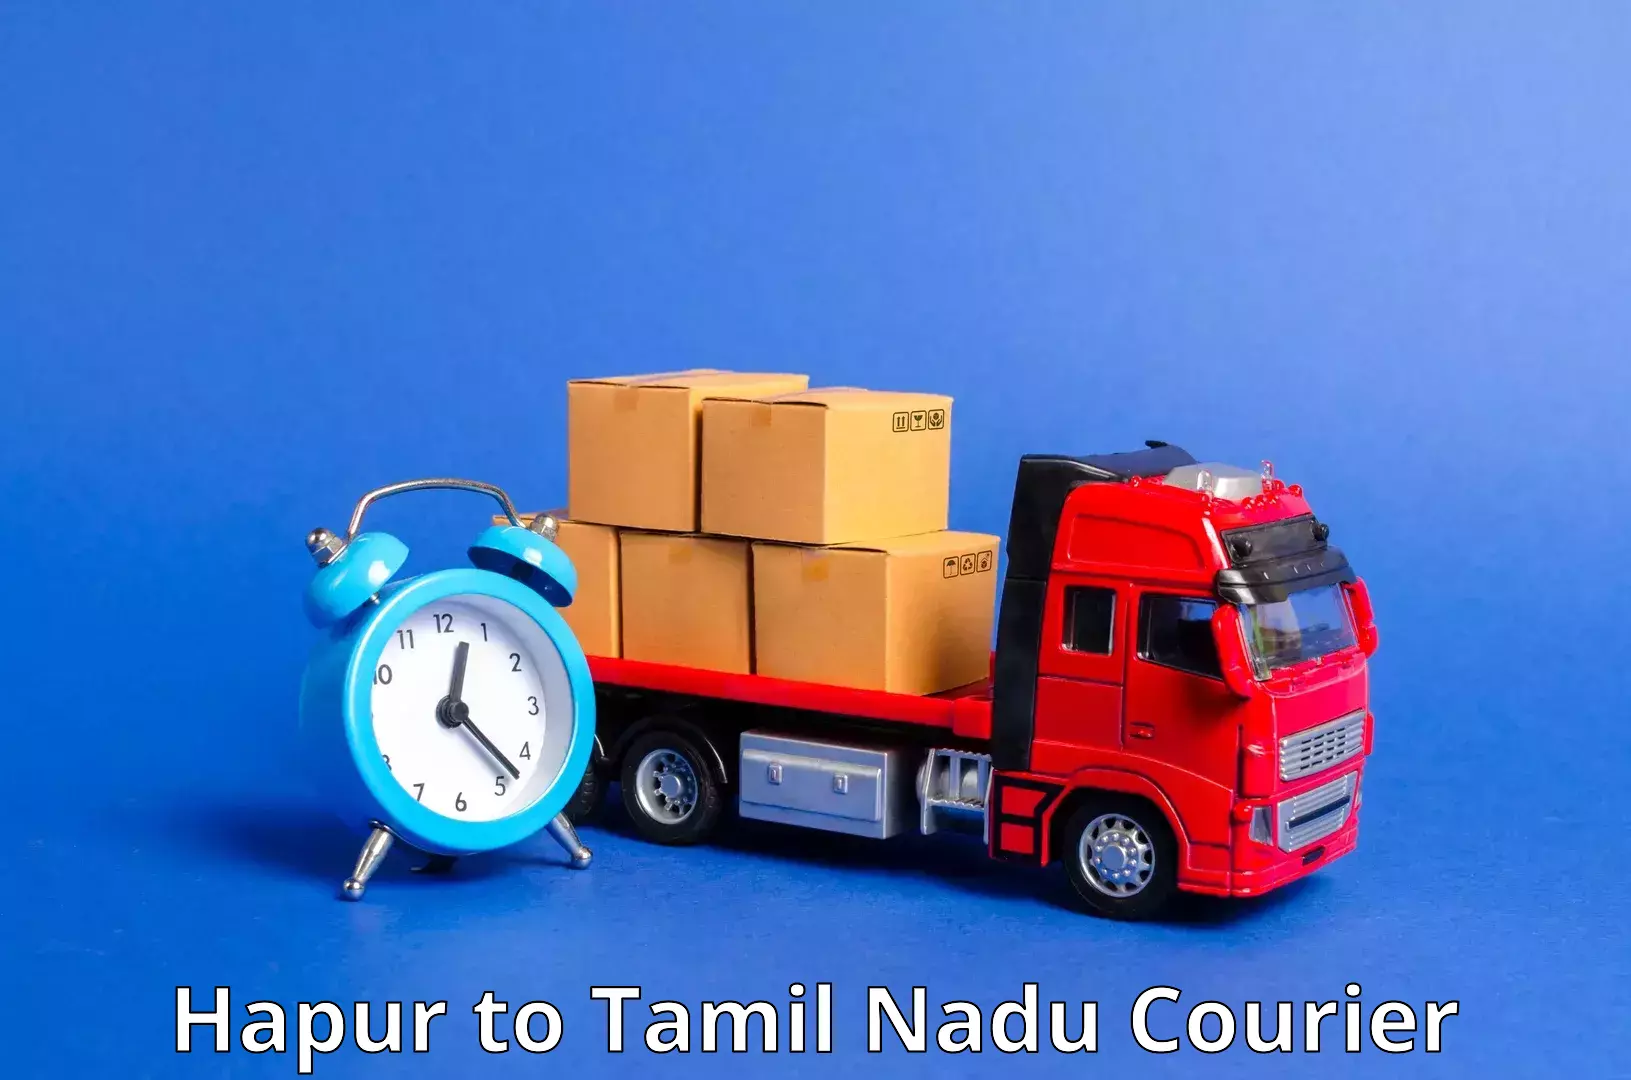 Reliable delivery network Hapur to Tiruvarur